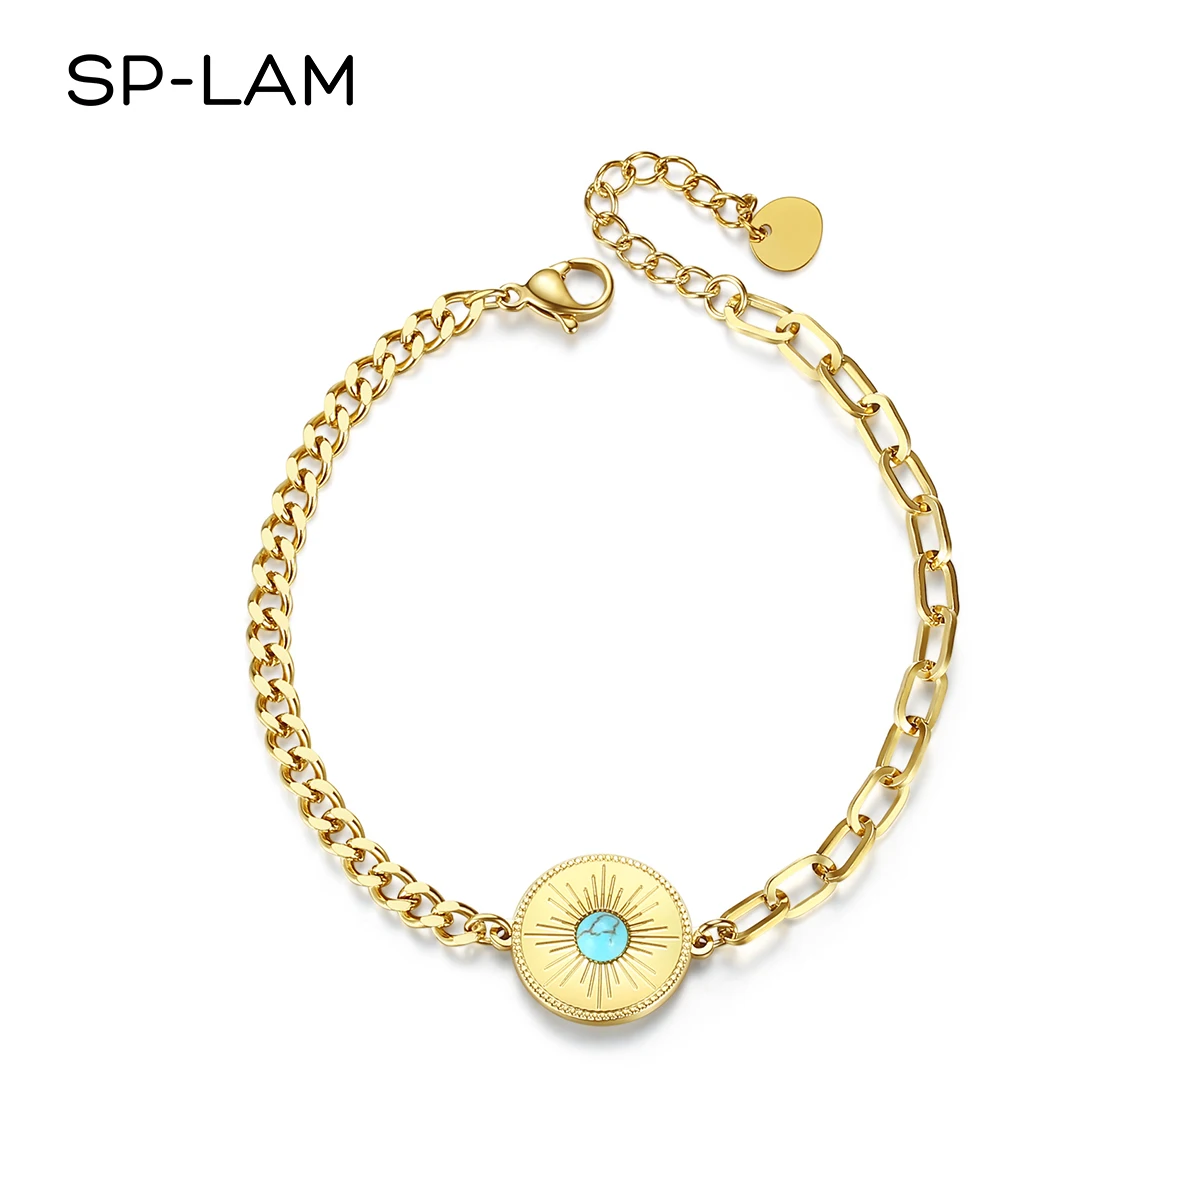 

SP-LAM Woman Steel Cuban Chain Jewelry Trending Accessory Turquoise Bangle Gold Stone Stainless Bracelet